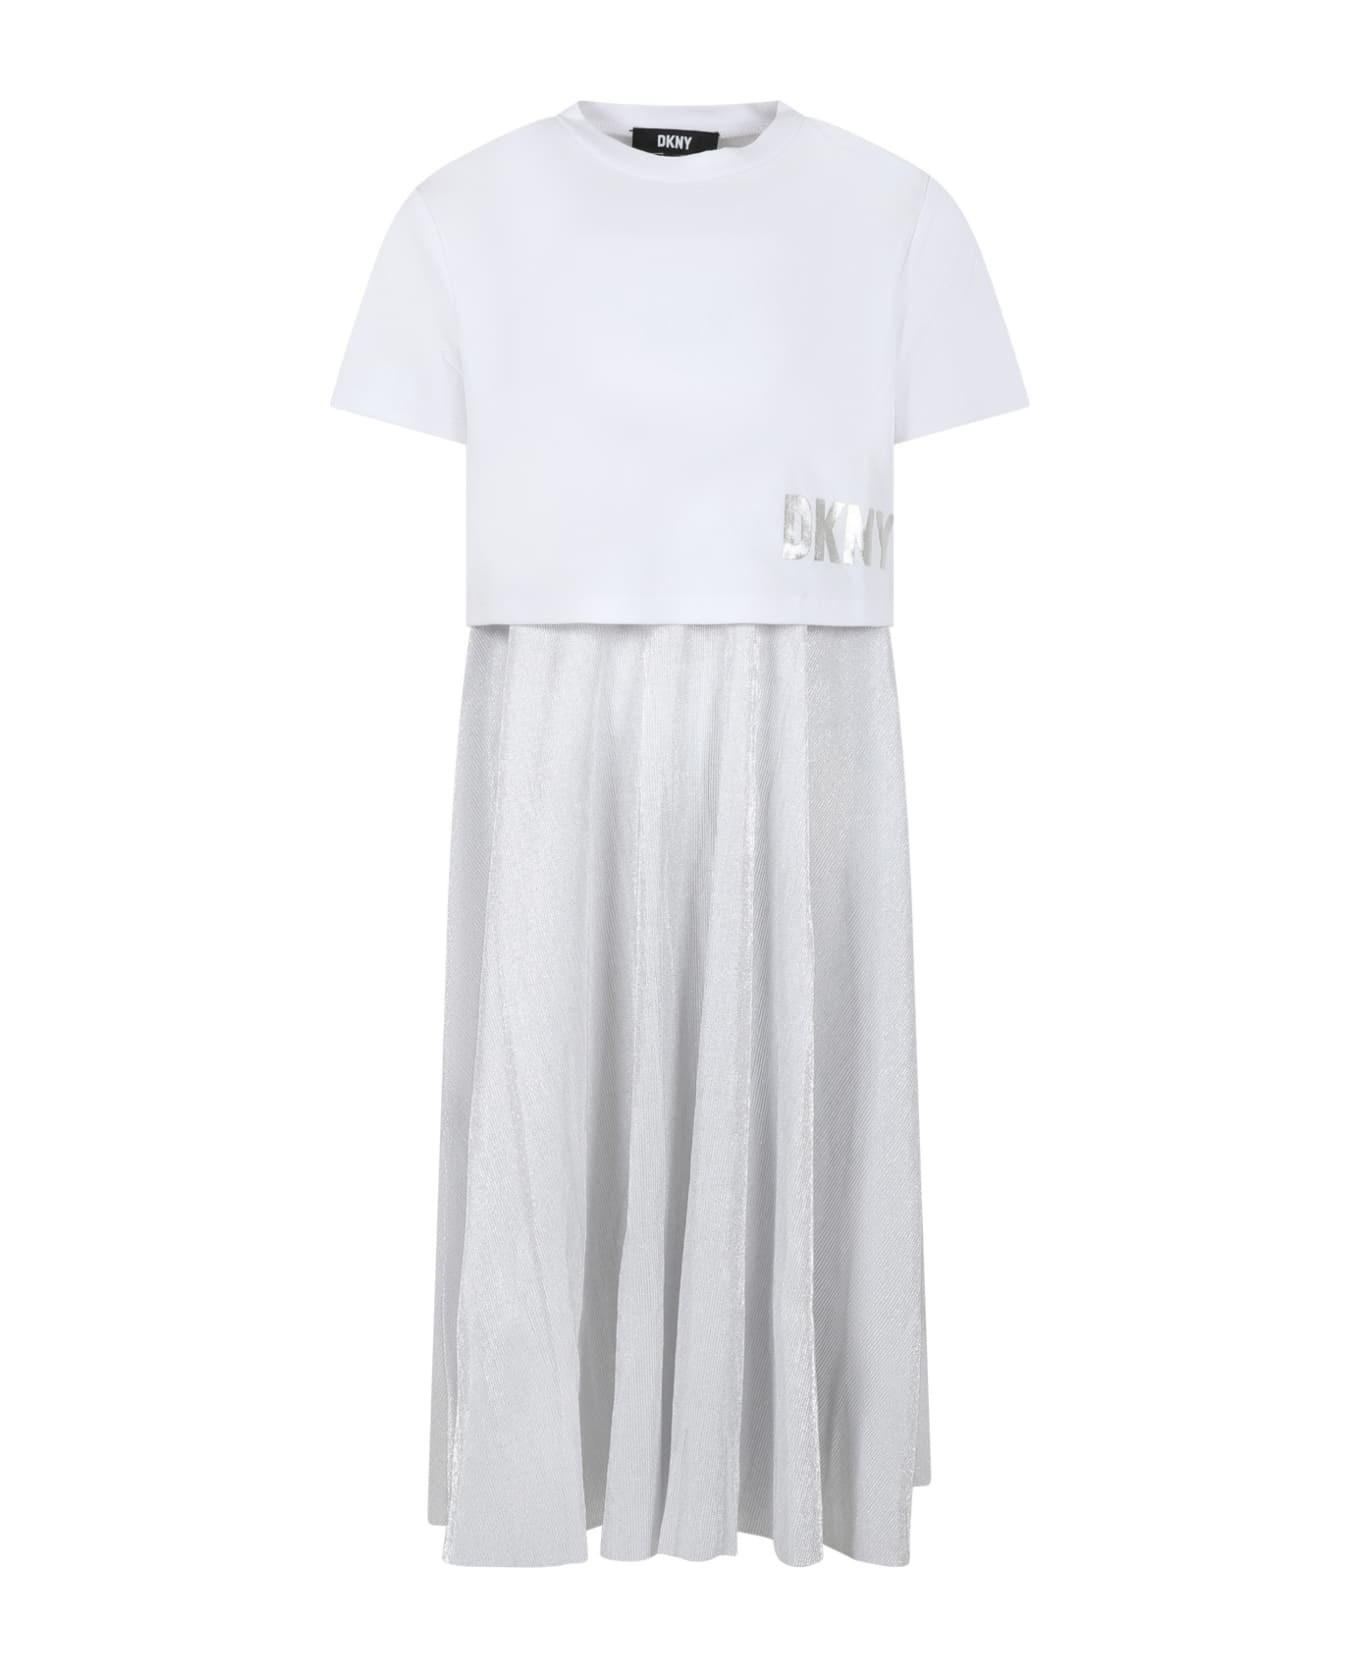 DKNY Casual White Dress For Girl With Logo - Silver